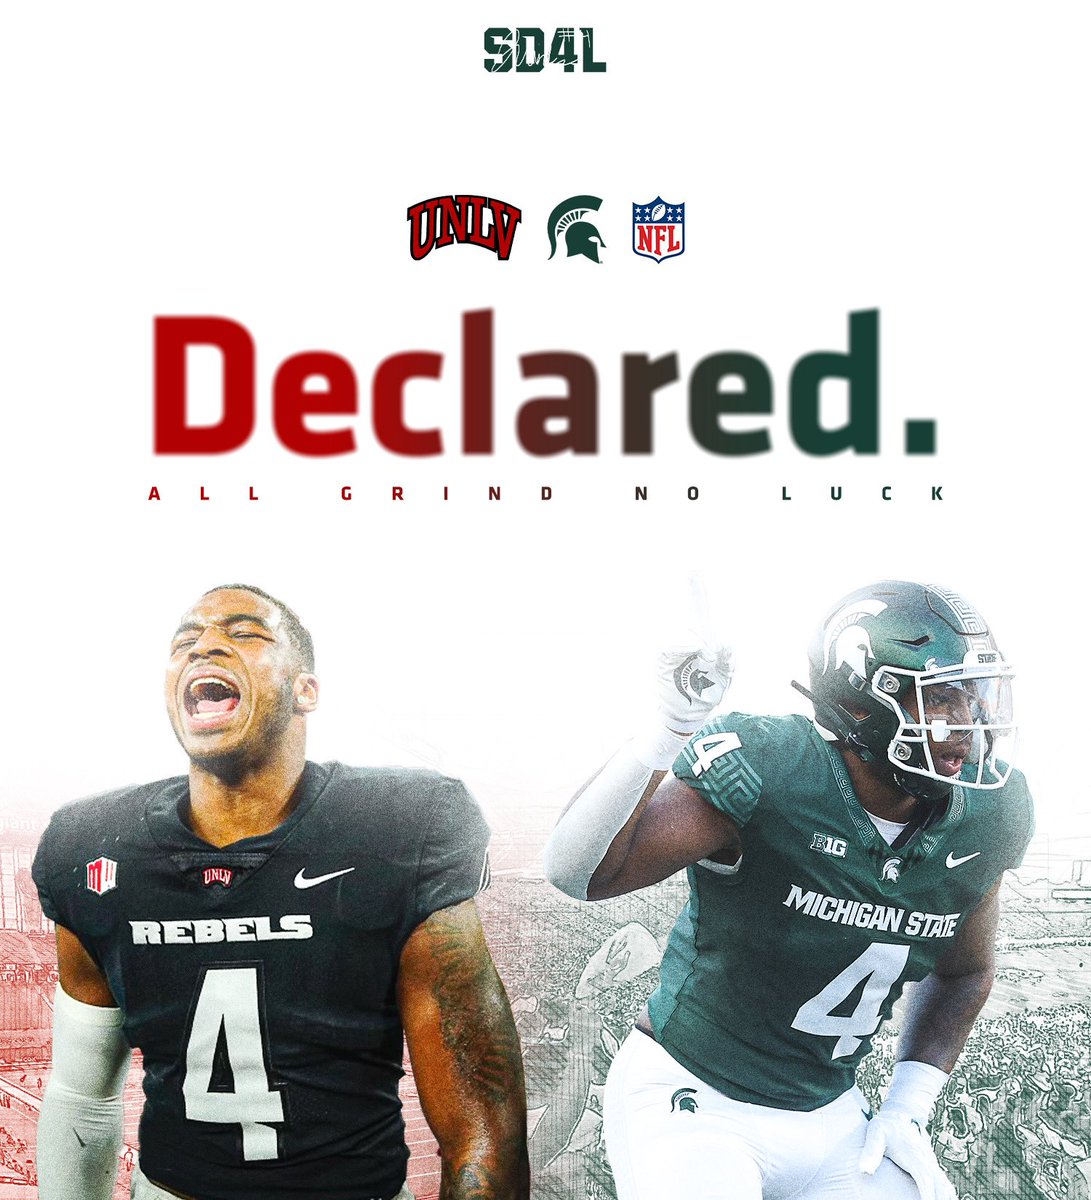 I want to thank god for putting this opportunity in front of me. I am beyond proud of myself, and my family who has been helping me pursue my dreams. SPARTAN and REBEL nation will always have a place in my heart. Thank you for everything! #Gogreen #GoRebels 💚❤️